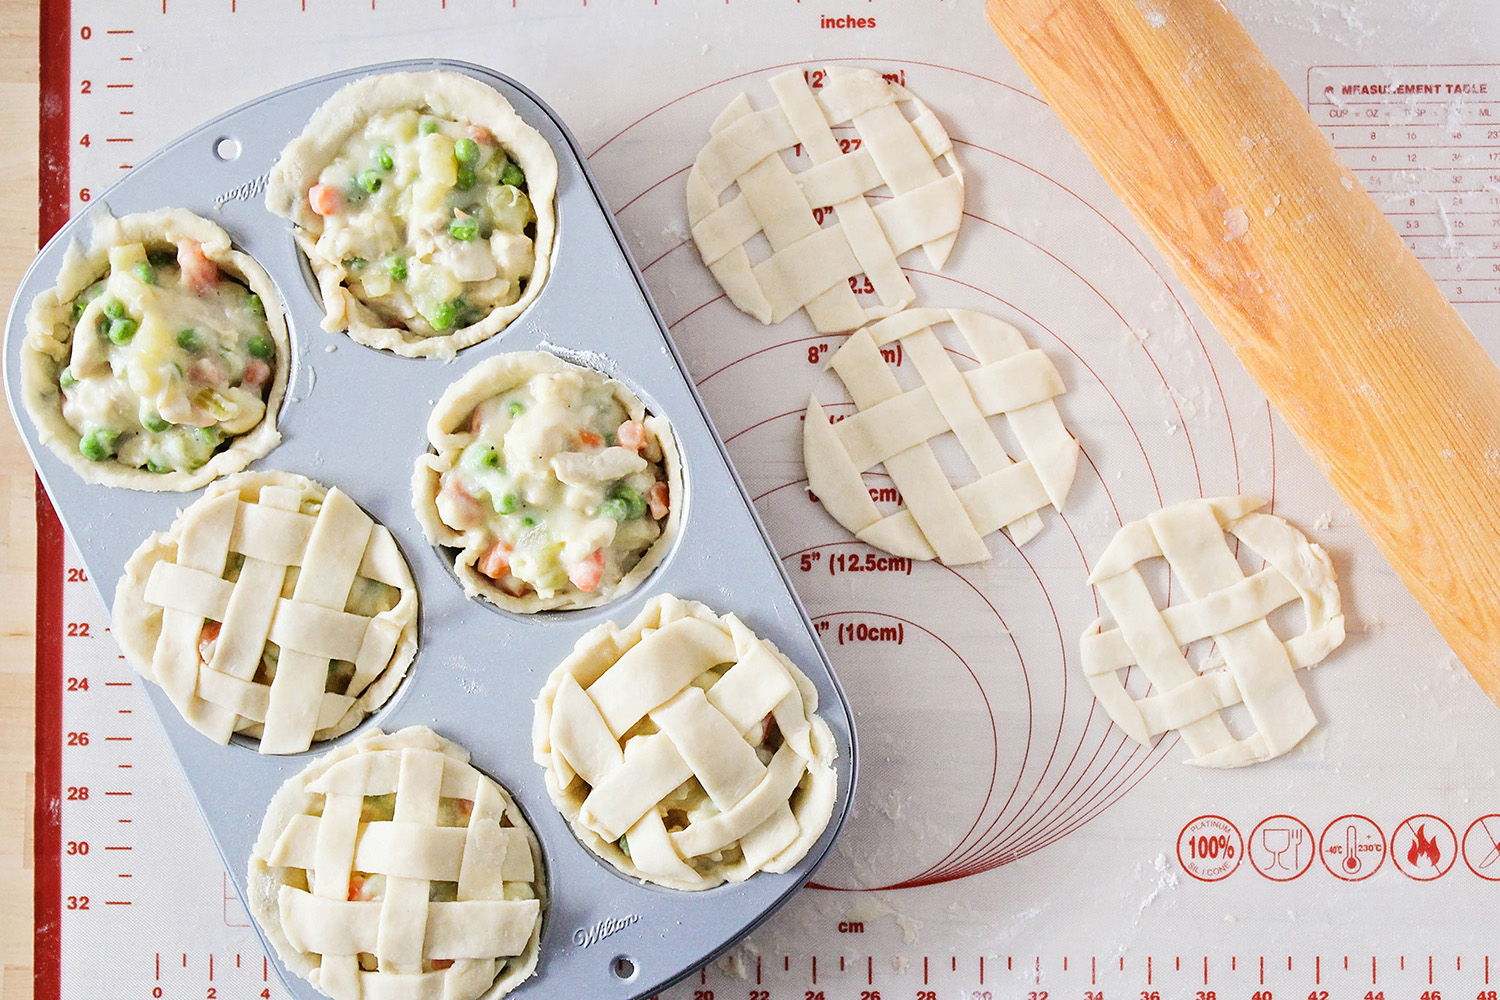 These savory mini chicken pot pies are so incredibly delicious, and adorable to boot!